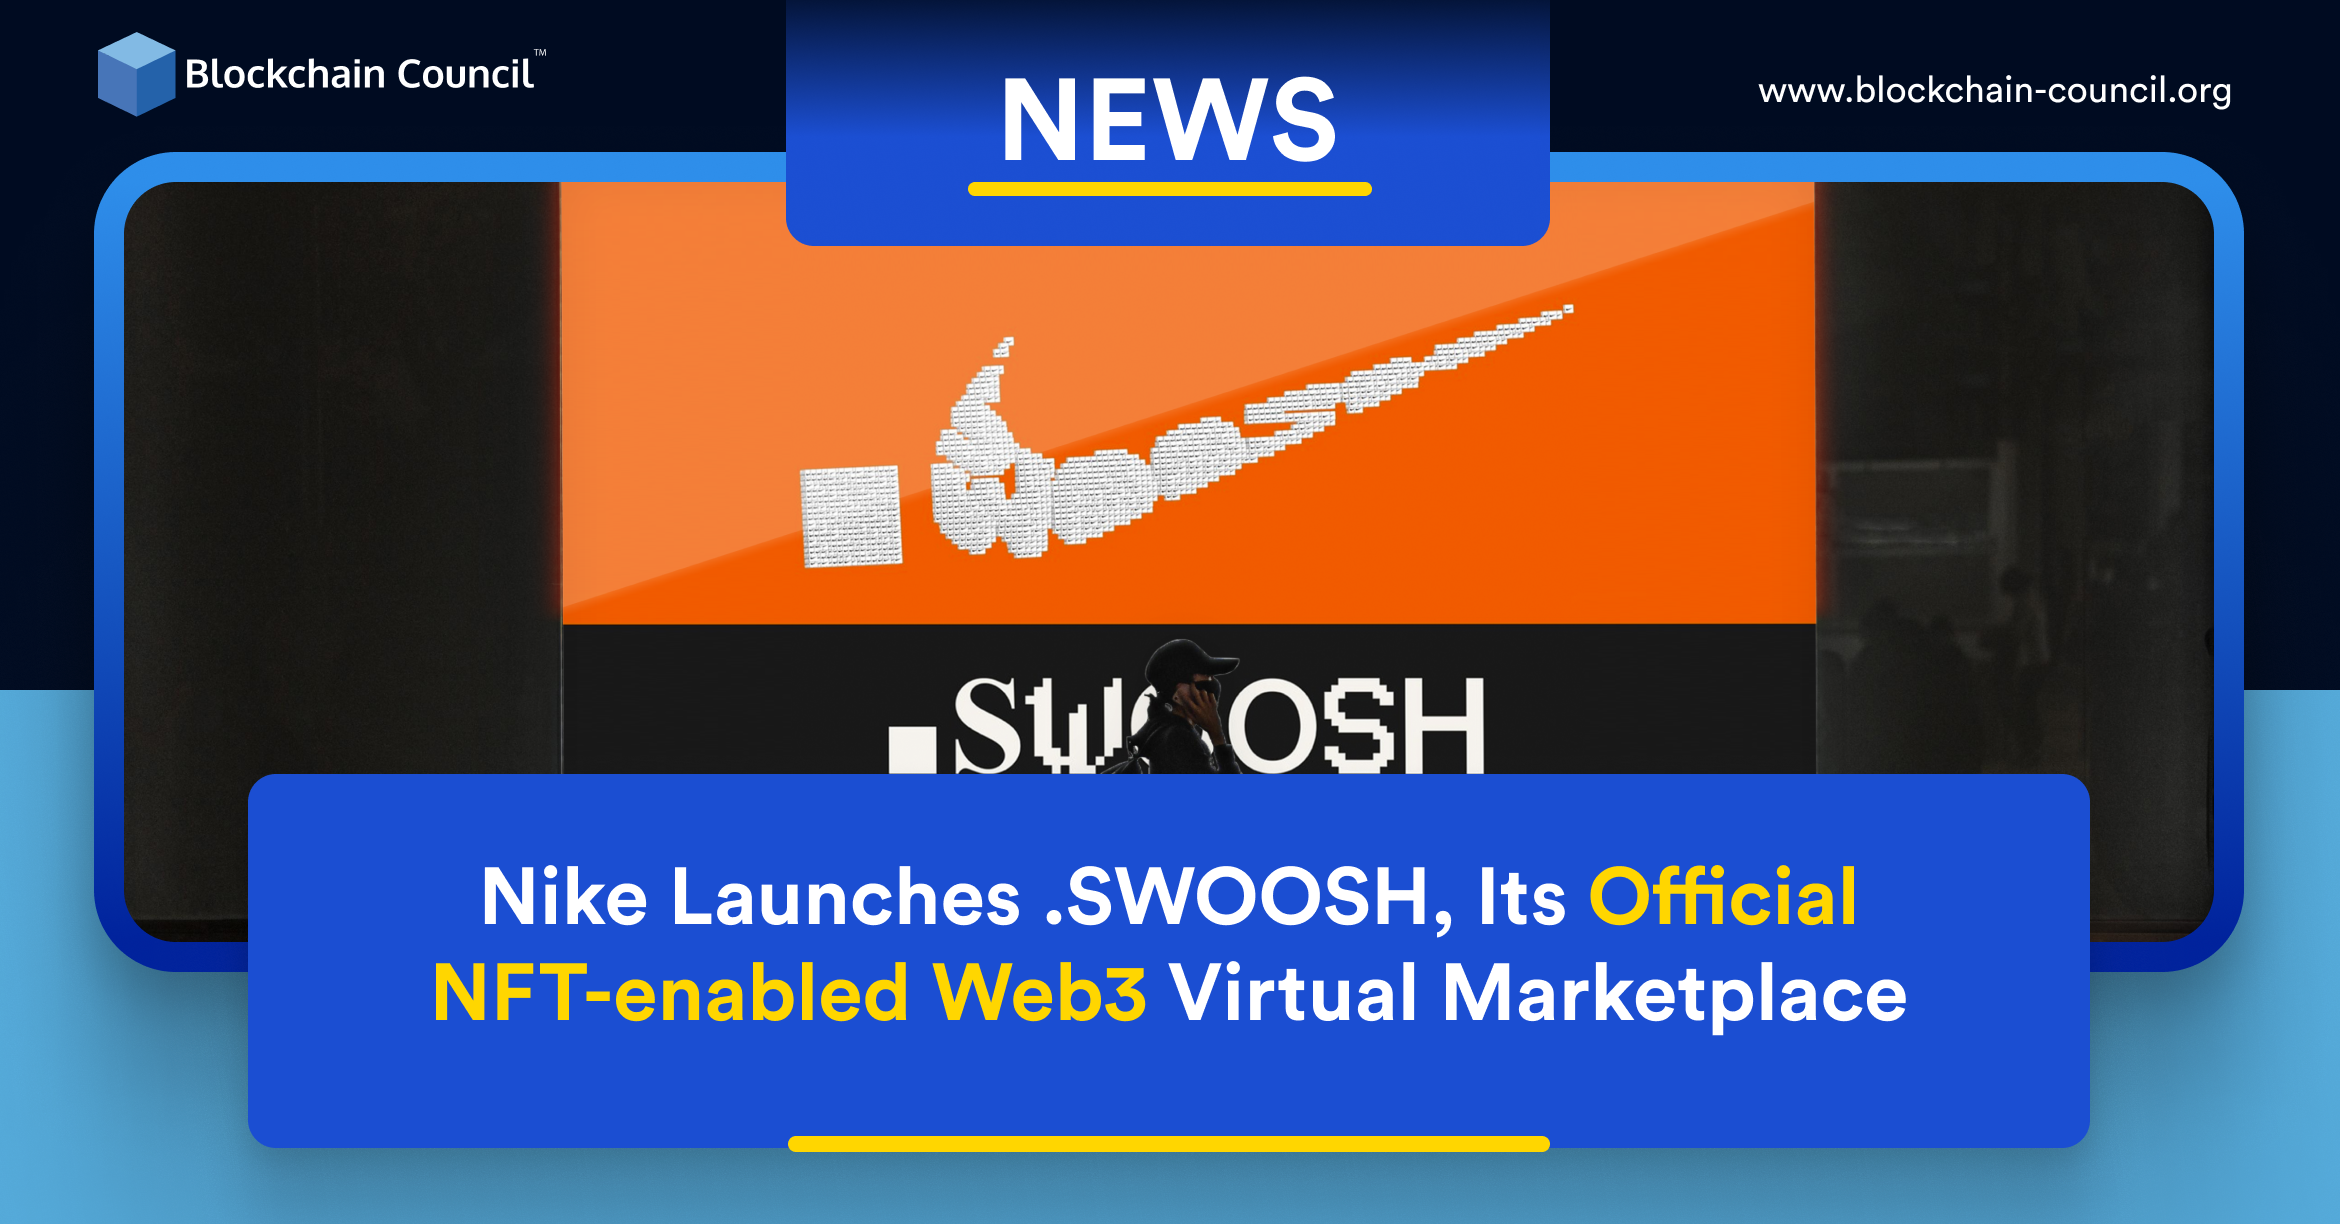 Nike Launches .SWOOSH, Its Official NFT-enabled Web3 Virtual Marketplace